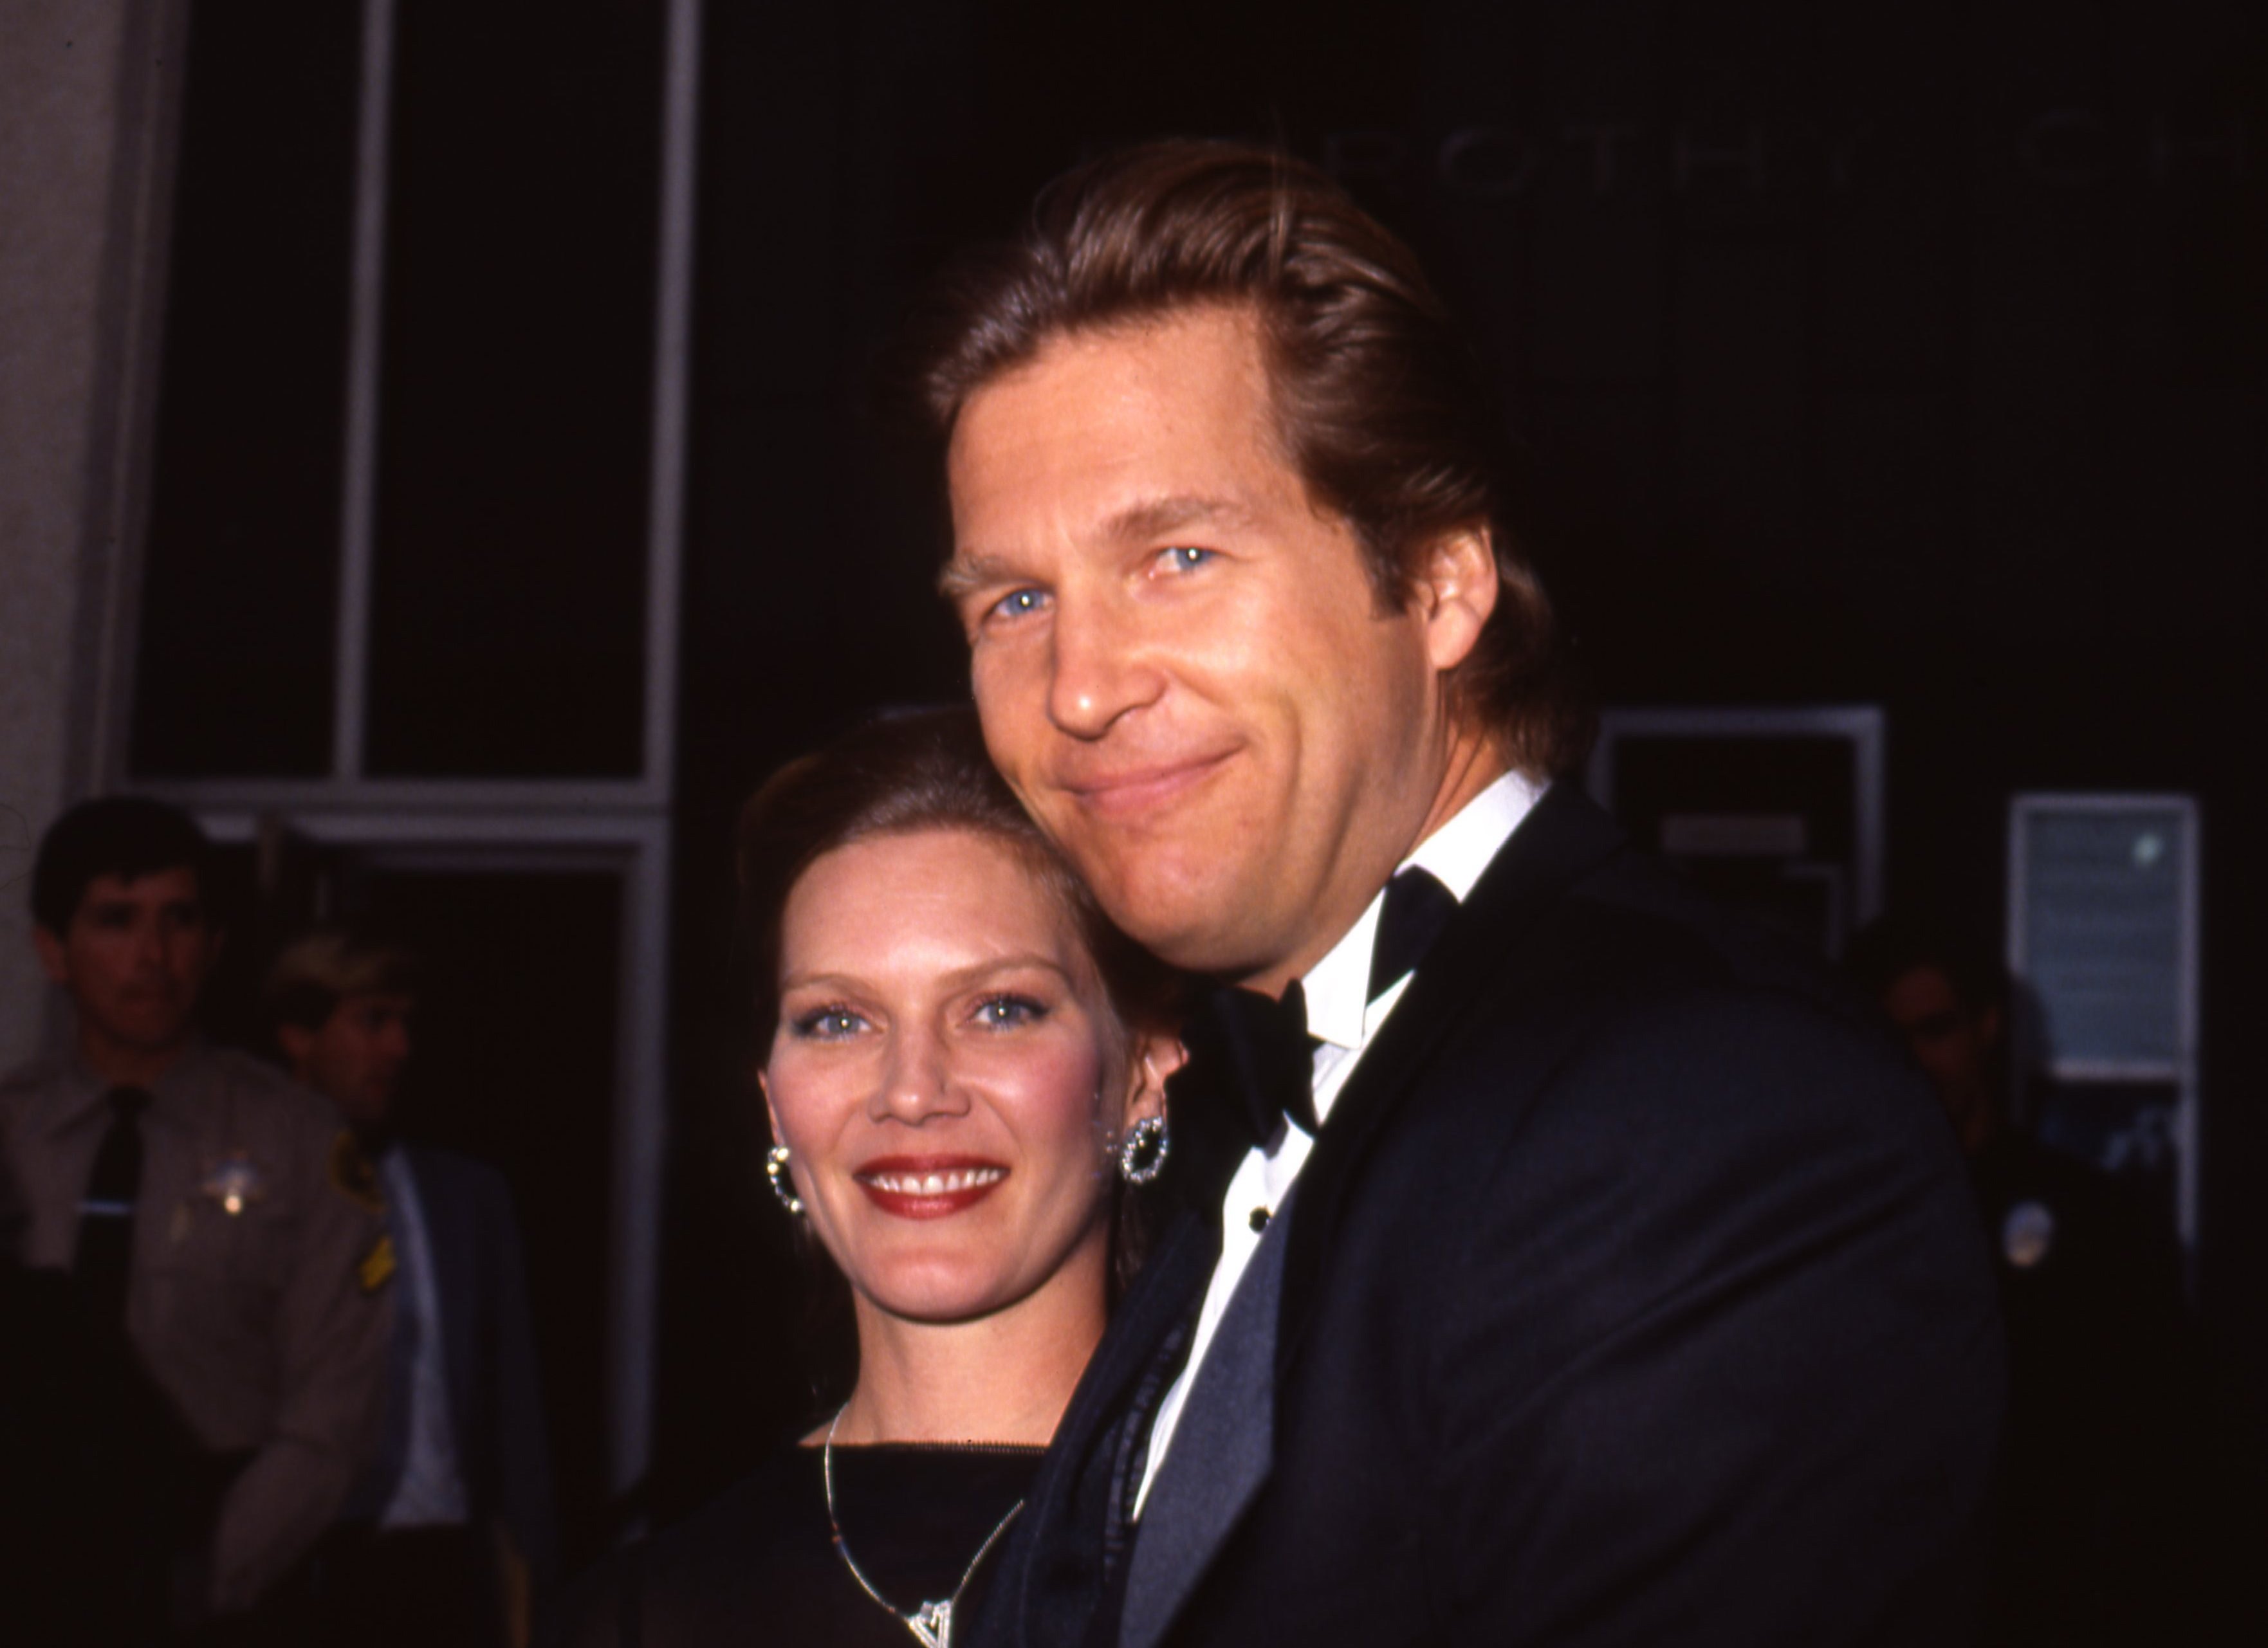 Susan and Jeff Bridges pose for a portrait at the Academy Awards in March 1987, in Los Angeles, California | Source: Getty Images